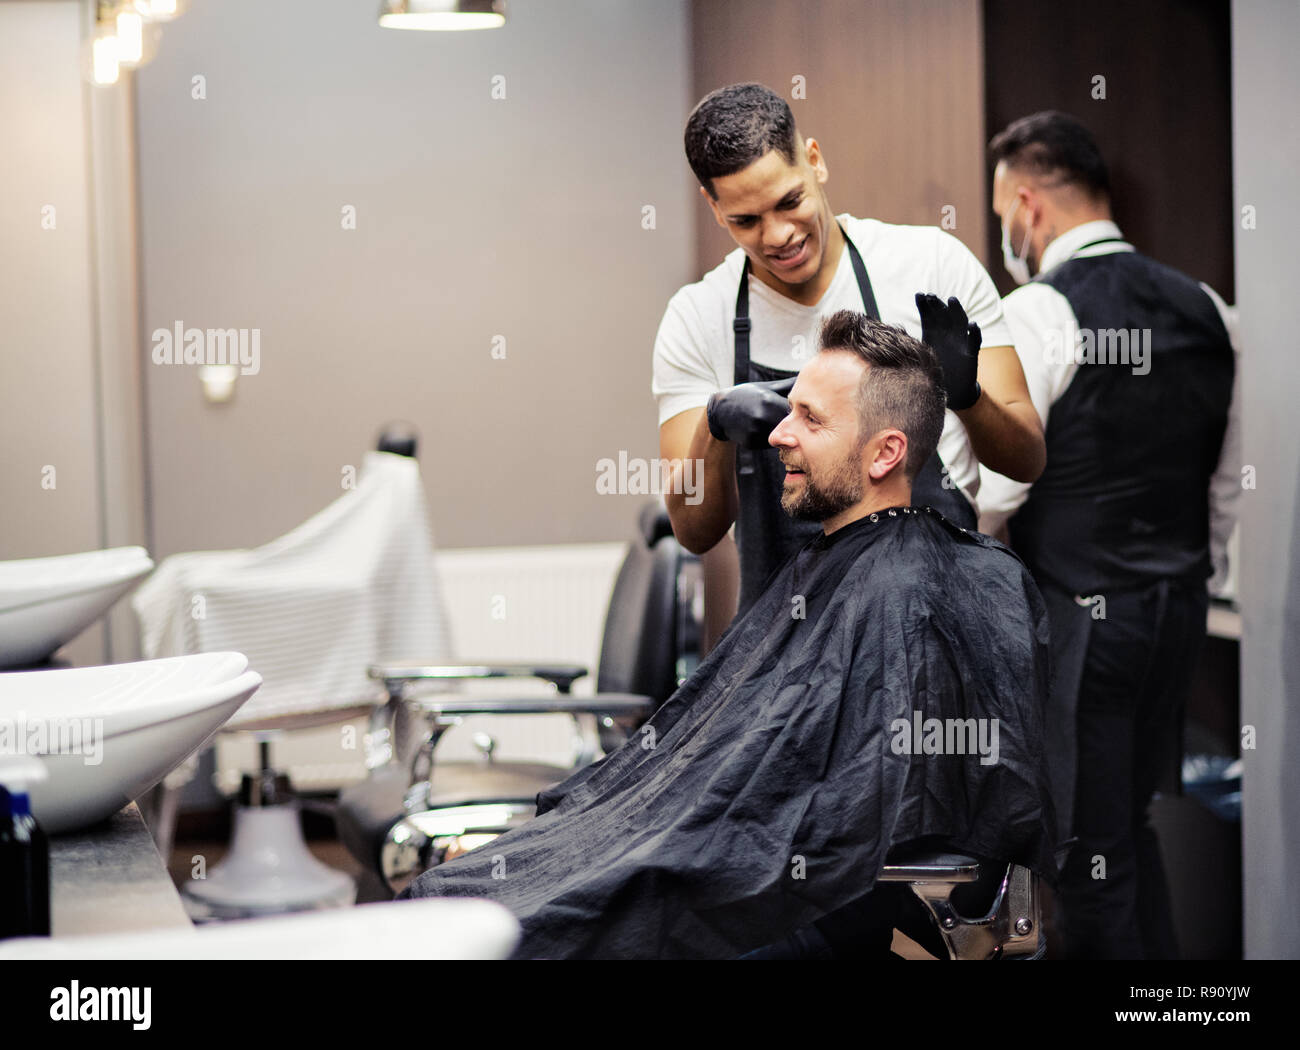 A hipster man client visiting haidresser and hairstylist in barber shop. Stock Photo